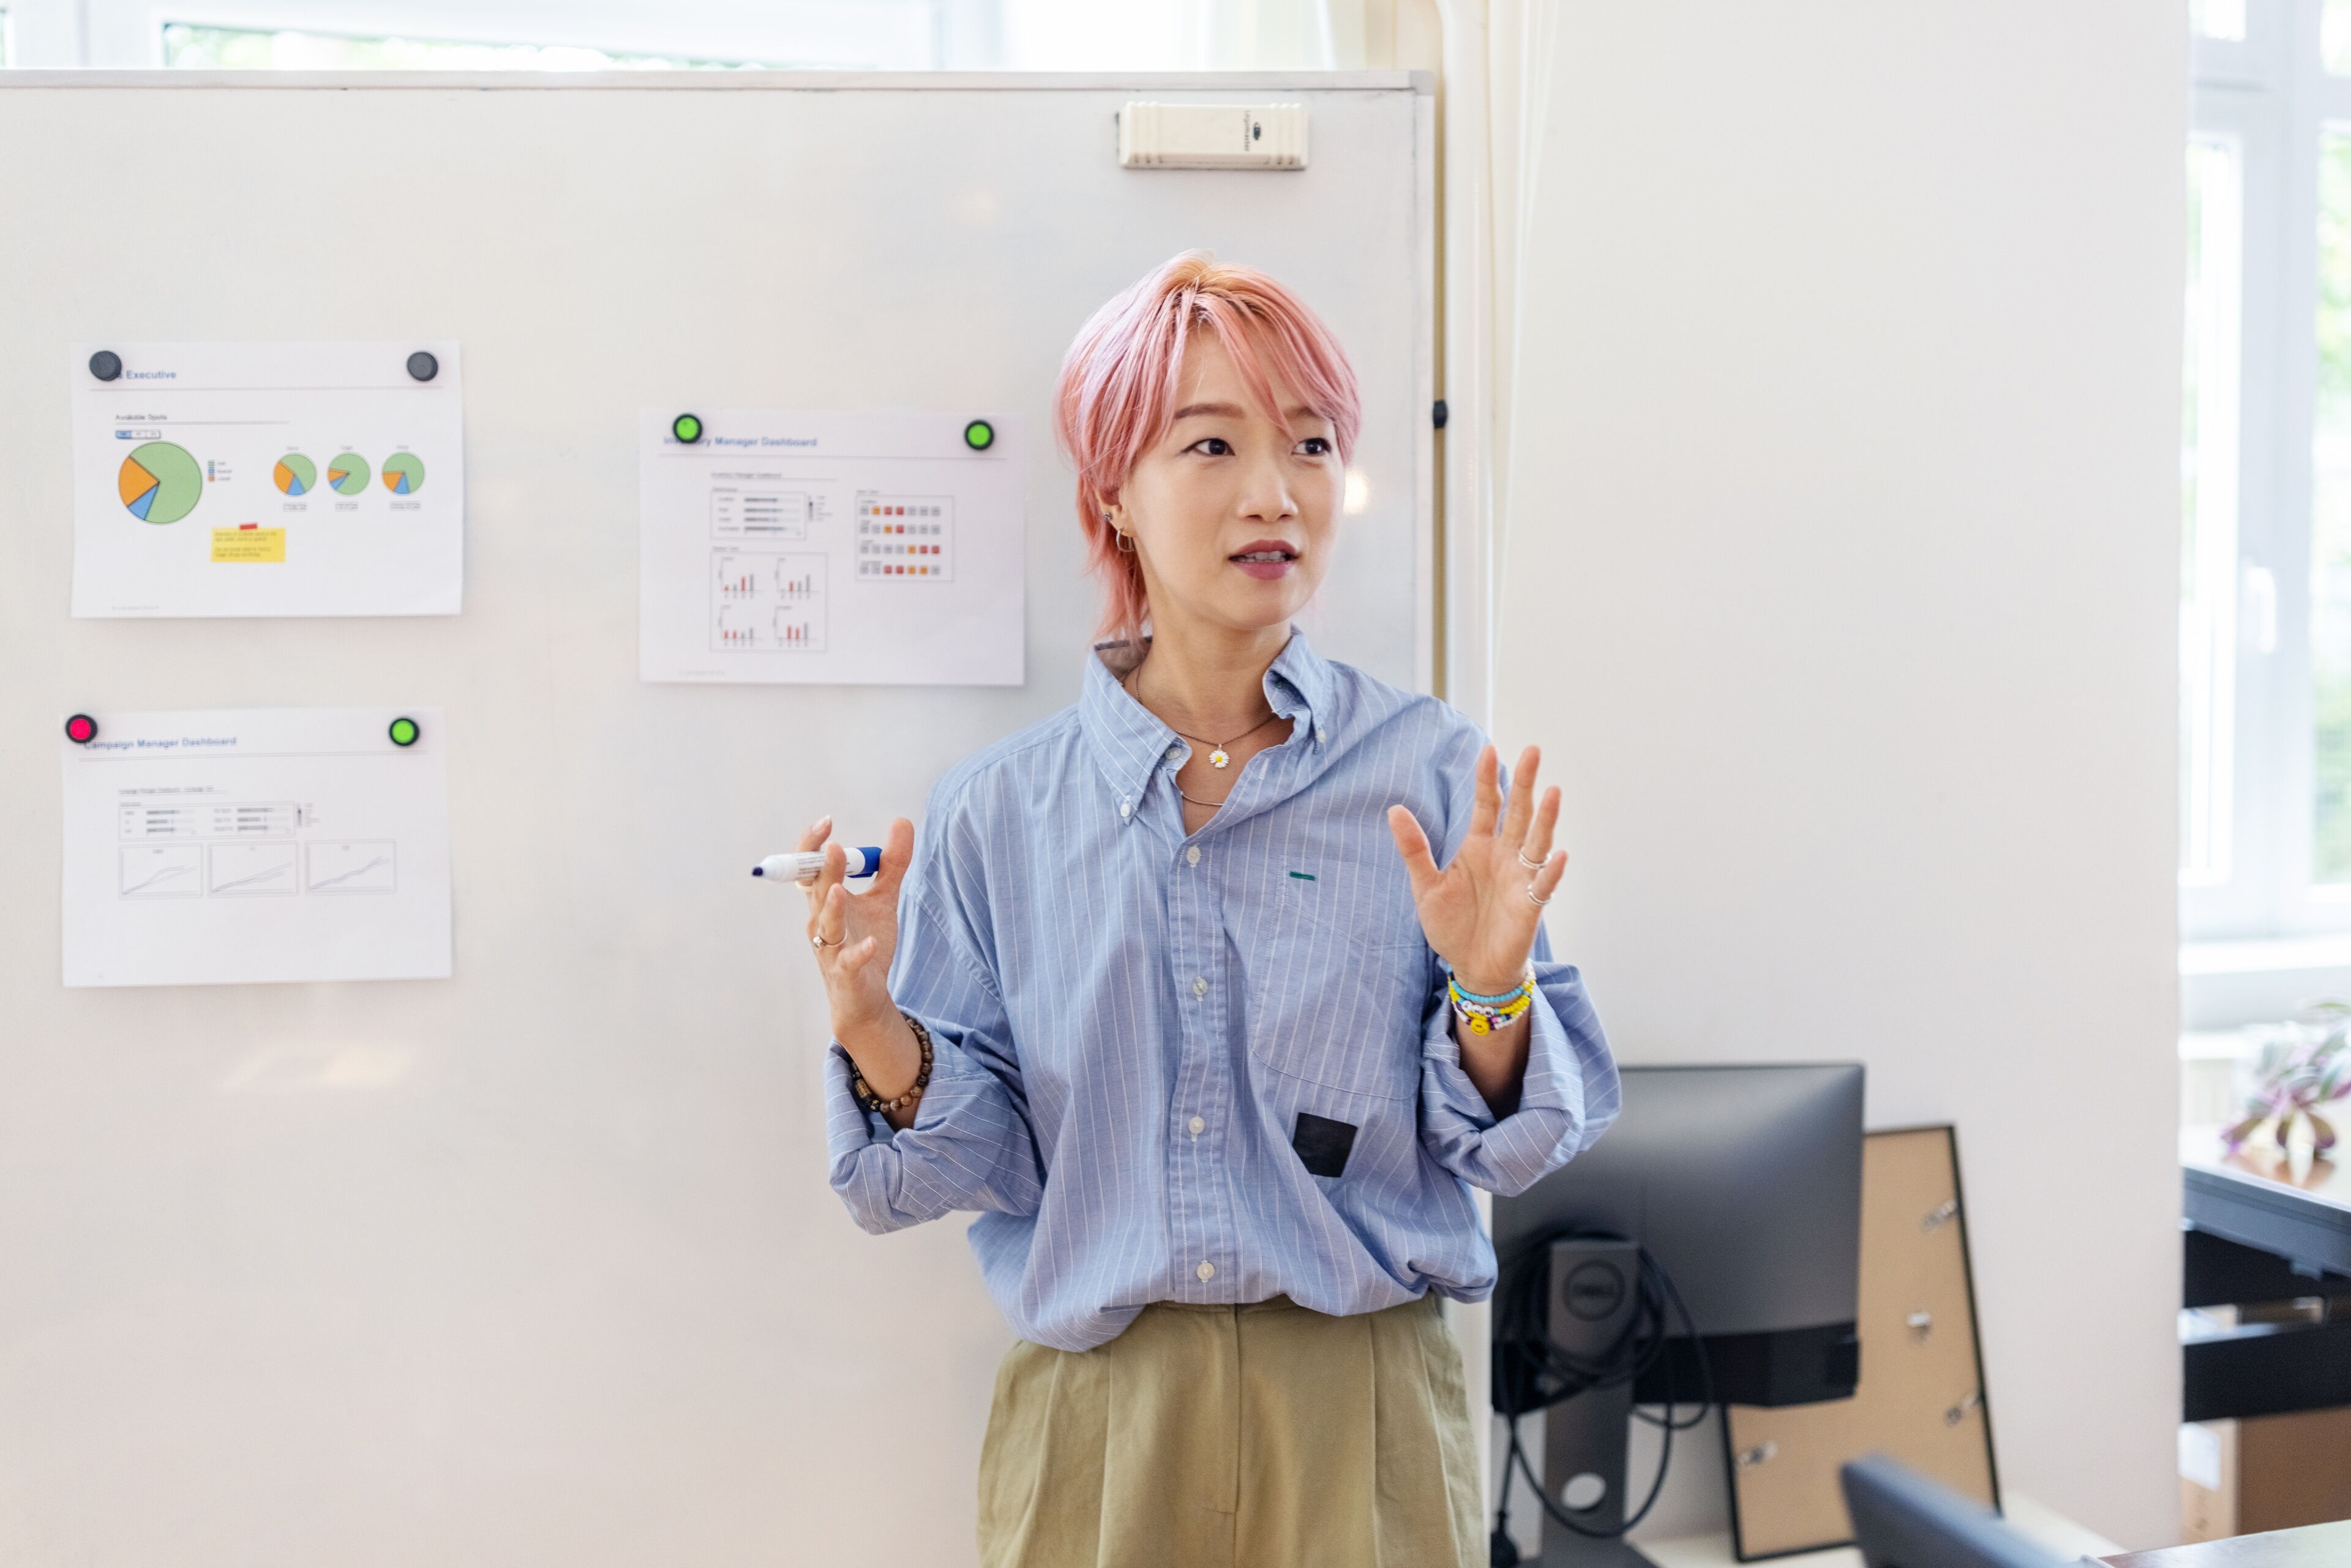 A confident individual with pink hair delivers a presentation in a bright office, gesturing towards charts on a whiteboard.